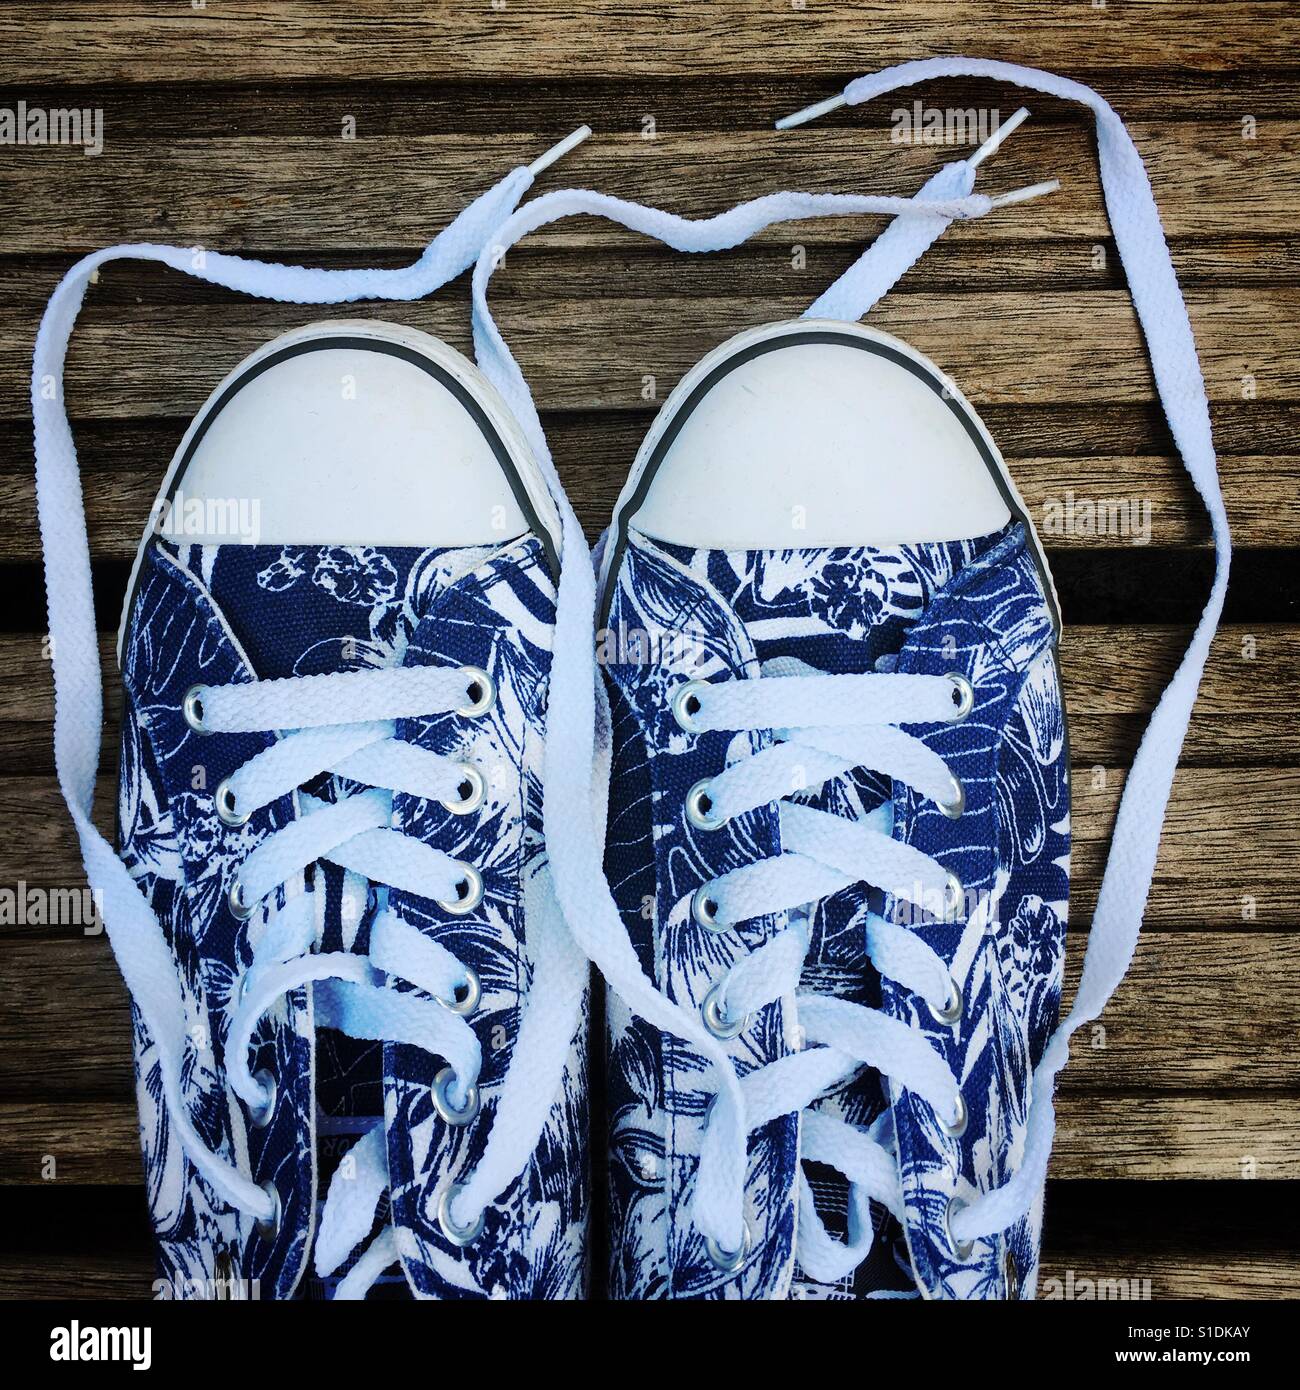 Canvas Converse-style trainers with a surfing style blue and white flower pattern print, photographed against wooden decking. Stock Photo